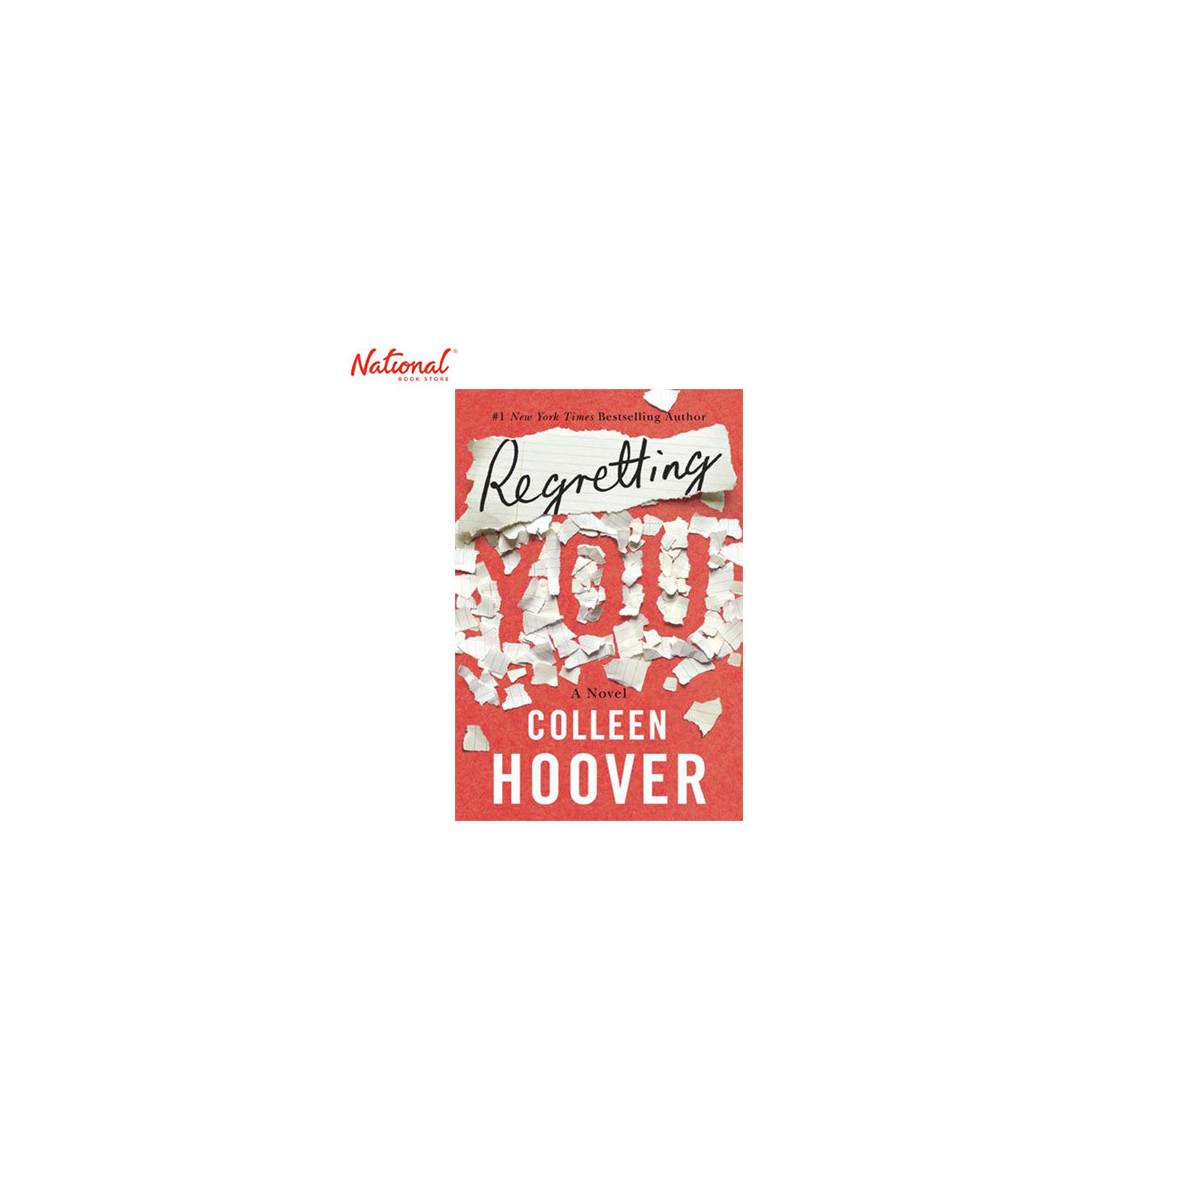 Regretting You Trade Paperback by Colleen Hoover